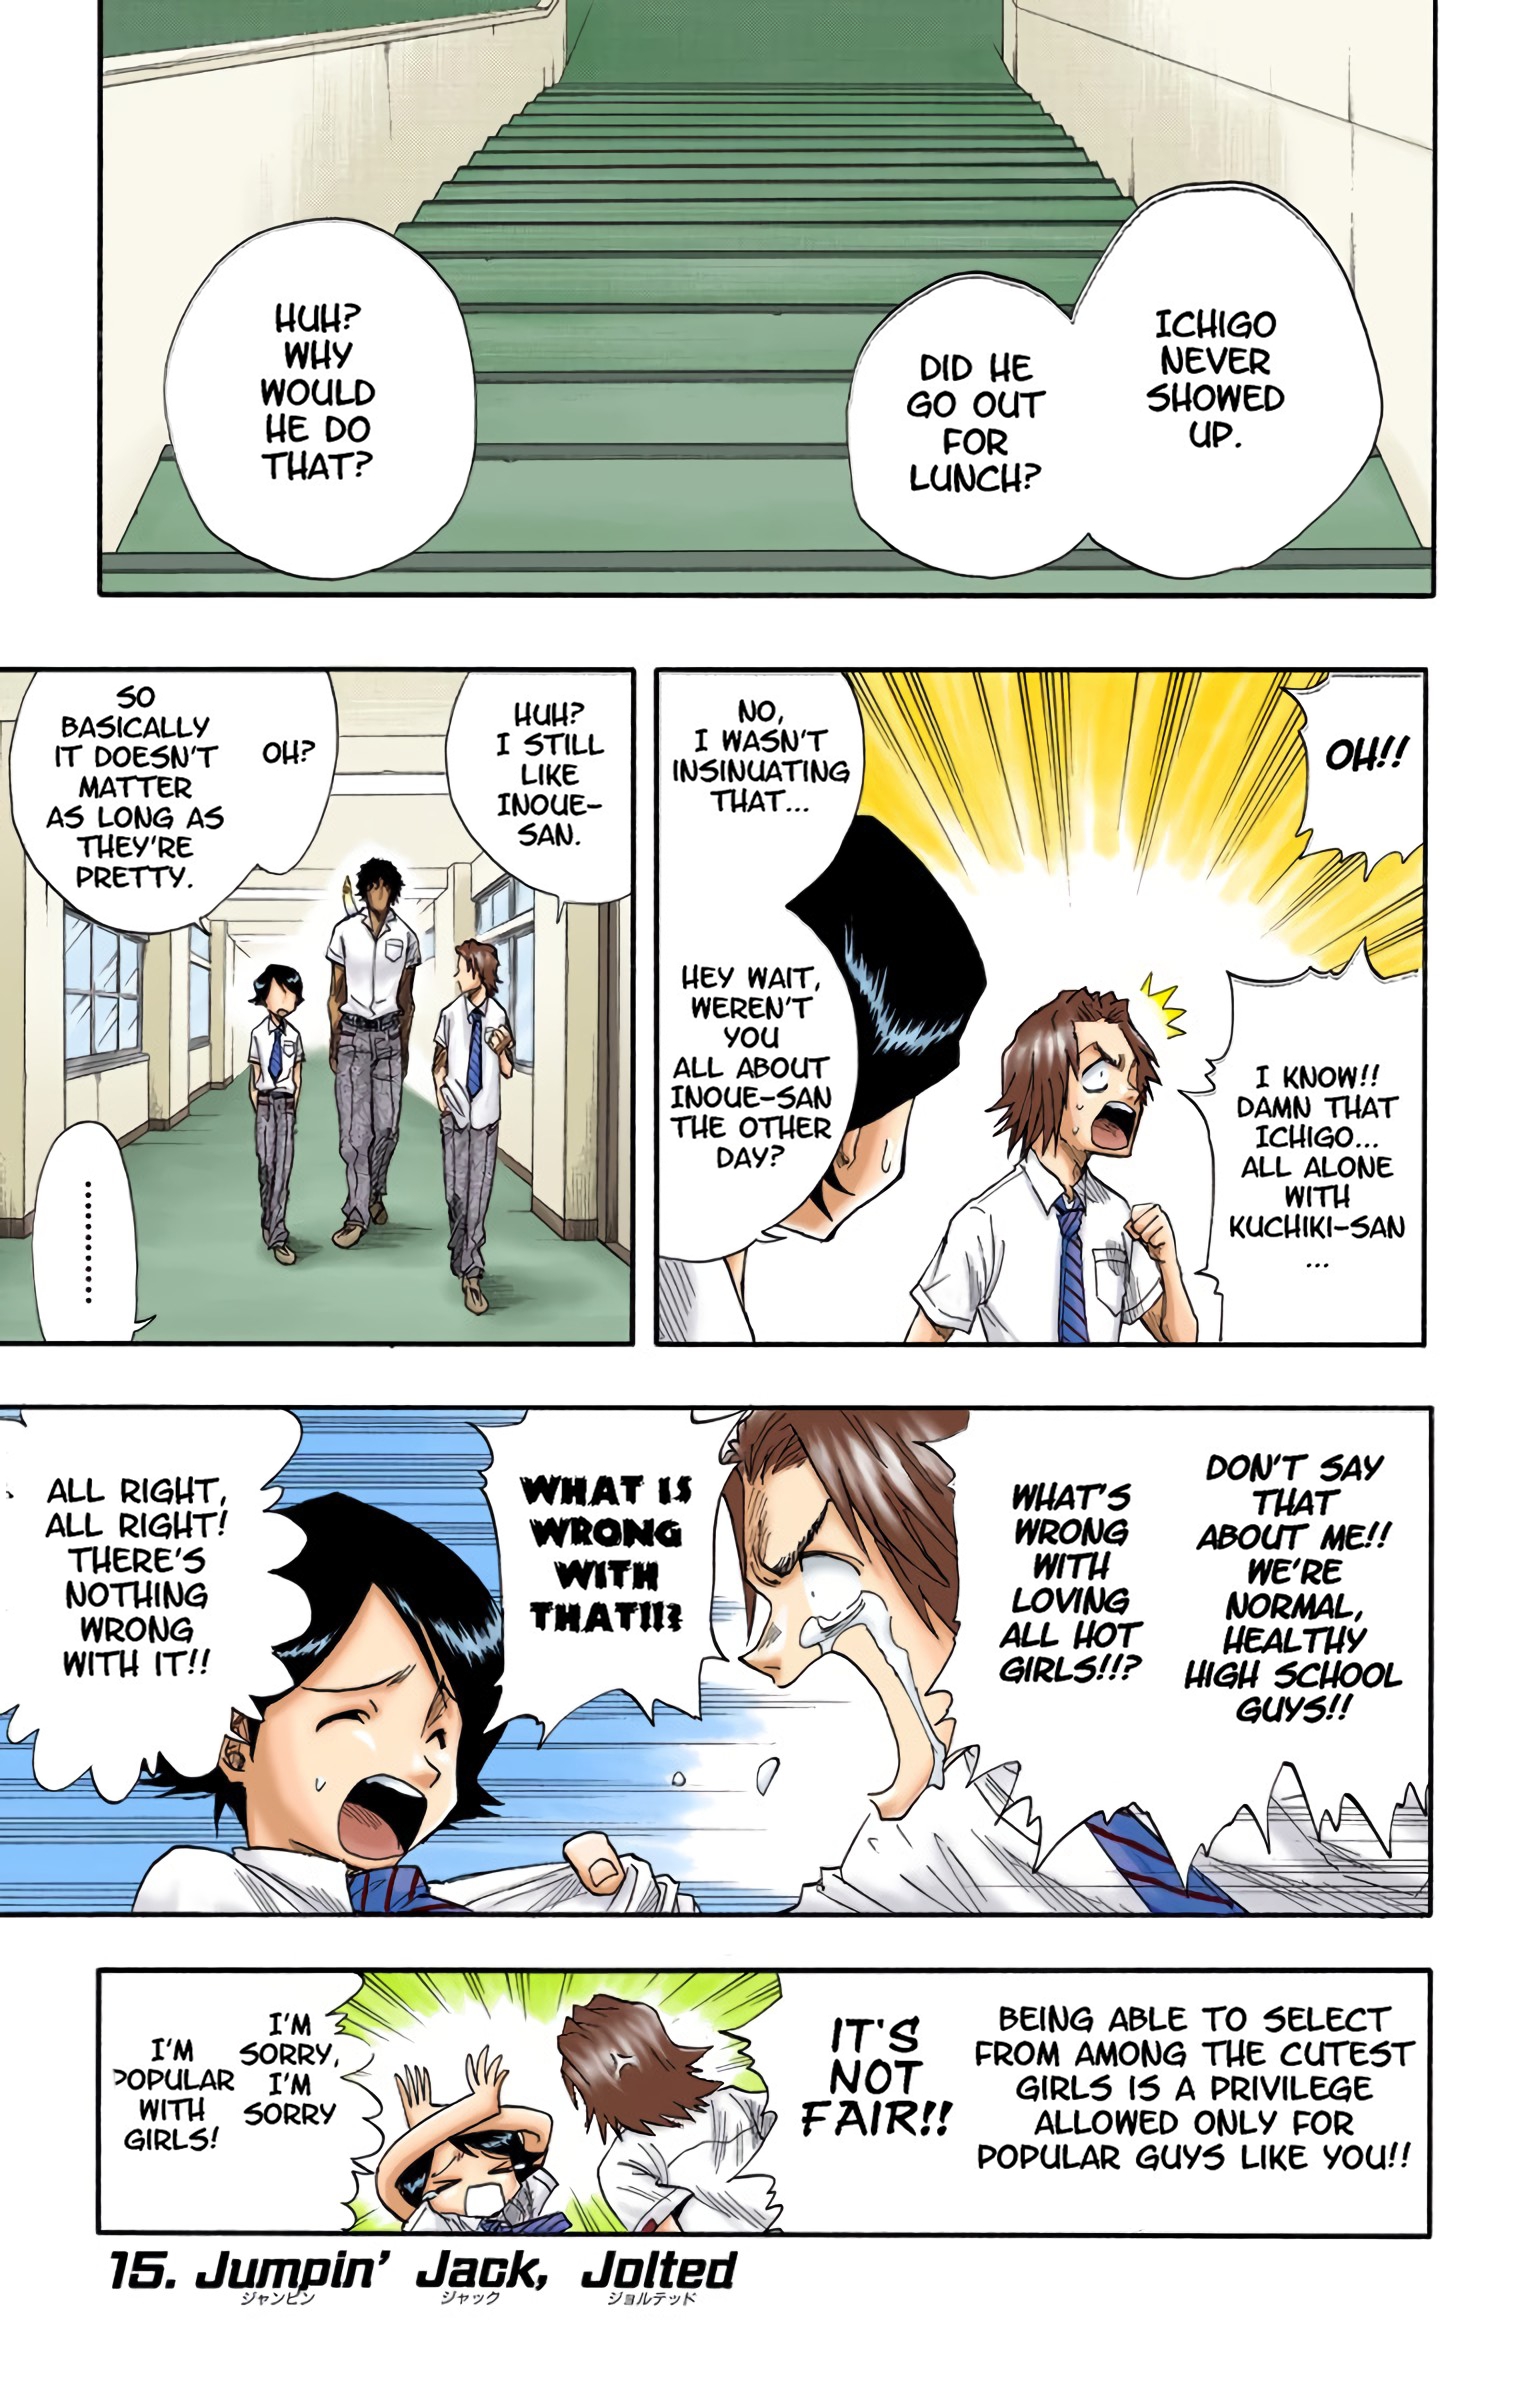 Bleach - Digital Colored Comics Vol.2 Chapter 15: Jumpin' Jack, Jolted - Picture 1